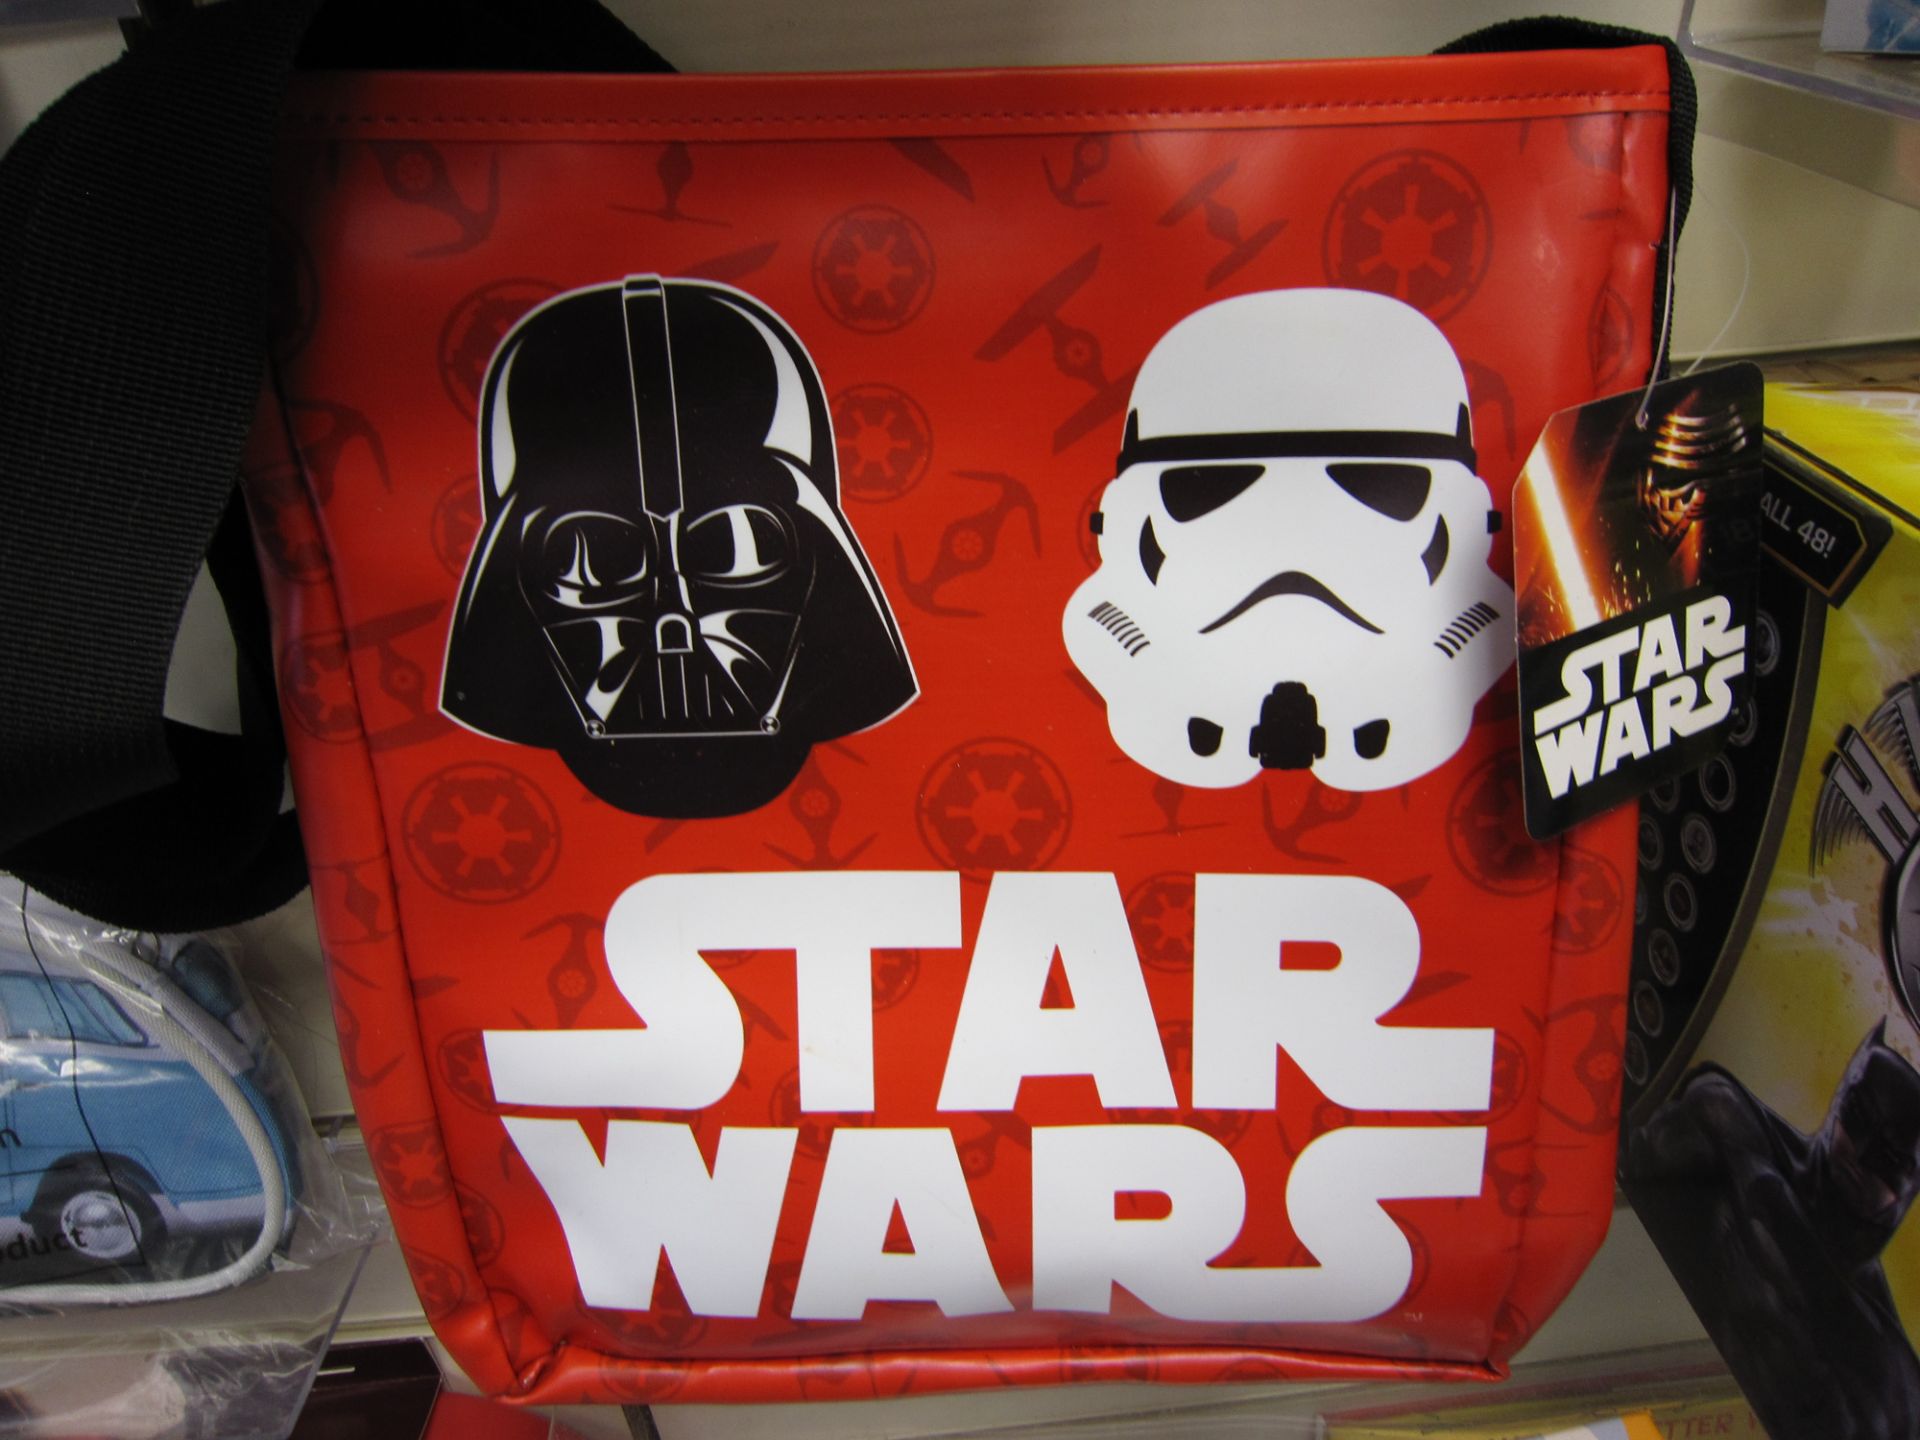 20 Star Wars Messenger Bags Brand New and Sealed - RRP £14.99 Each